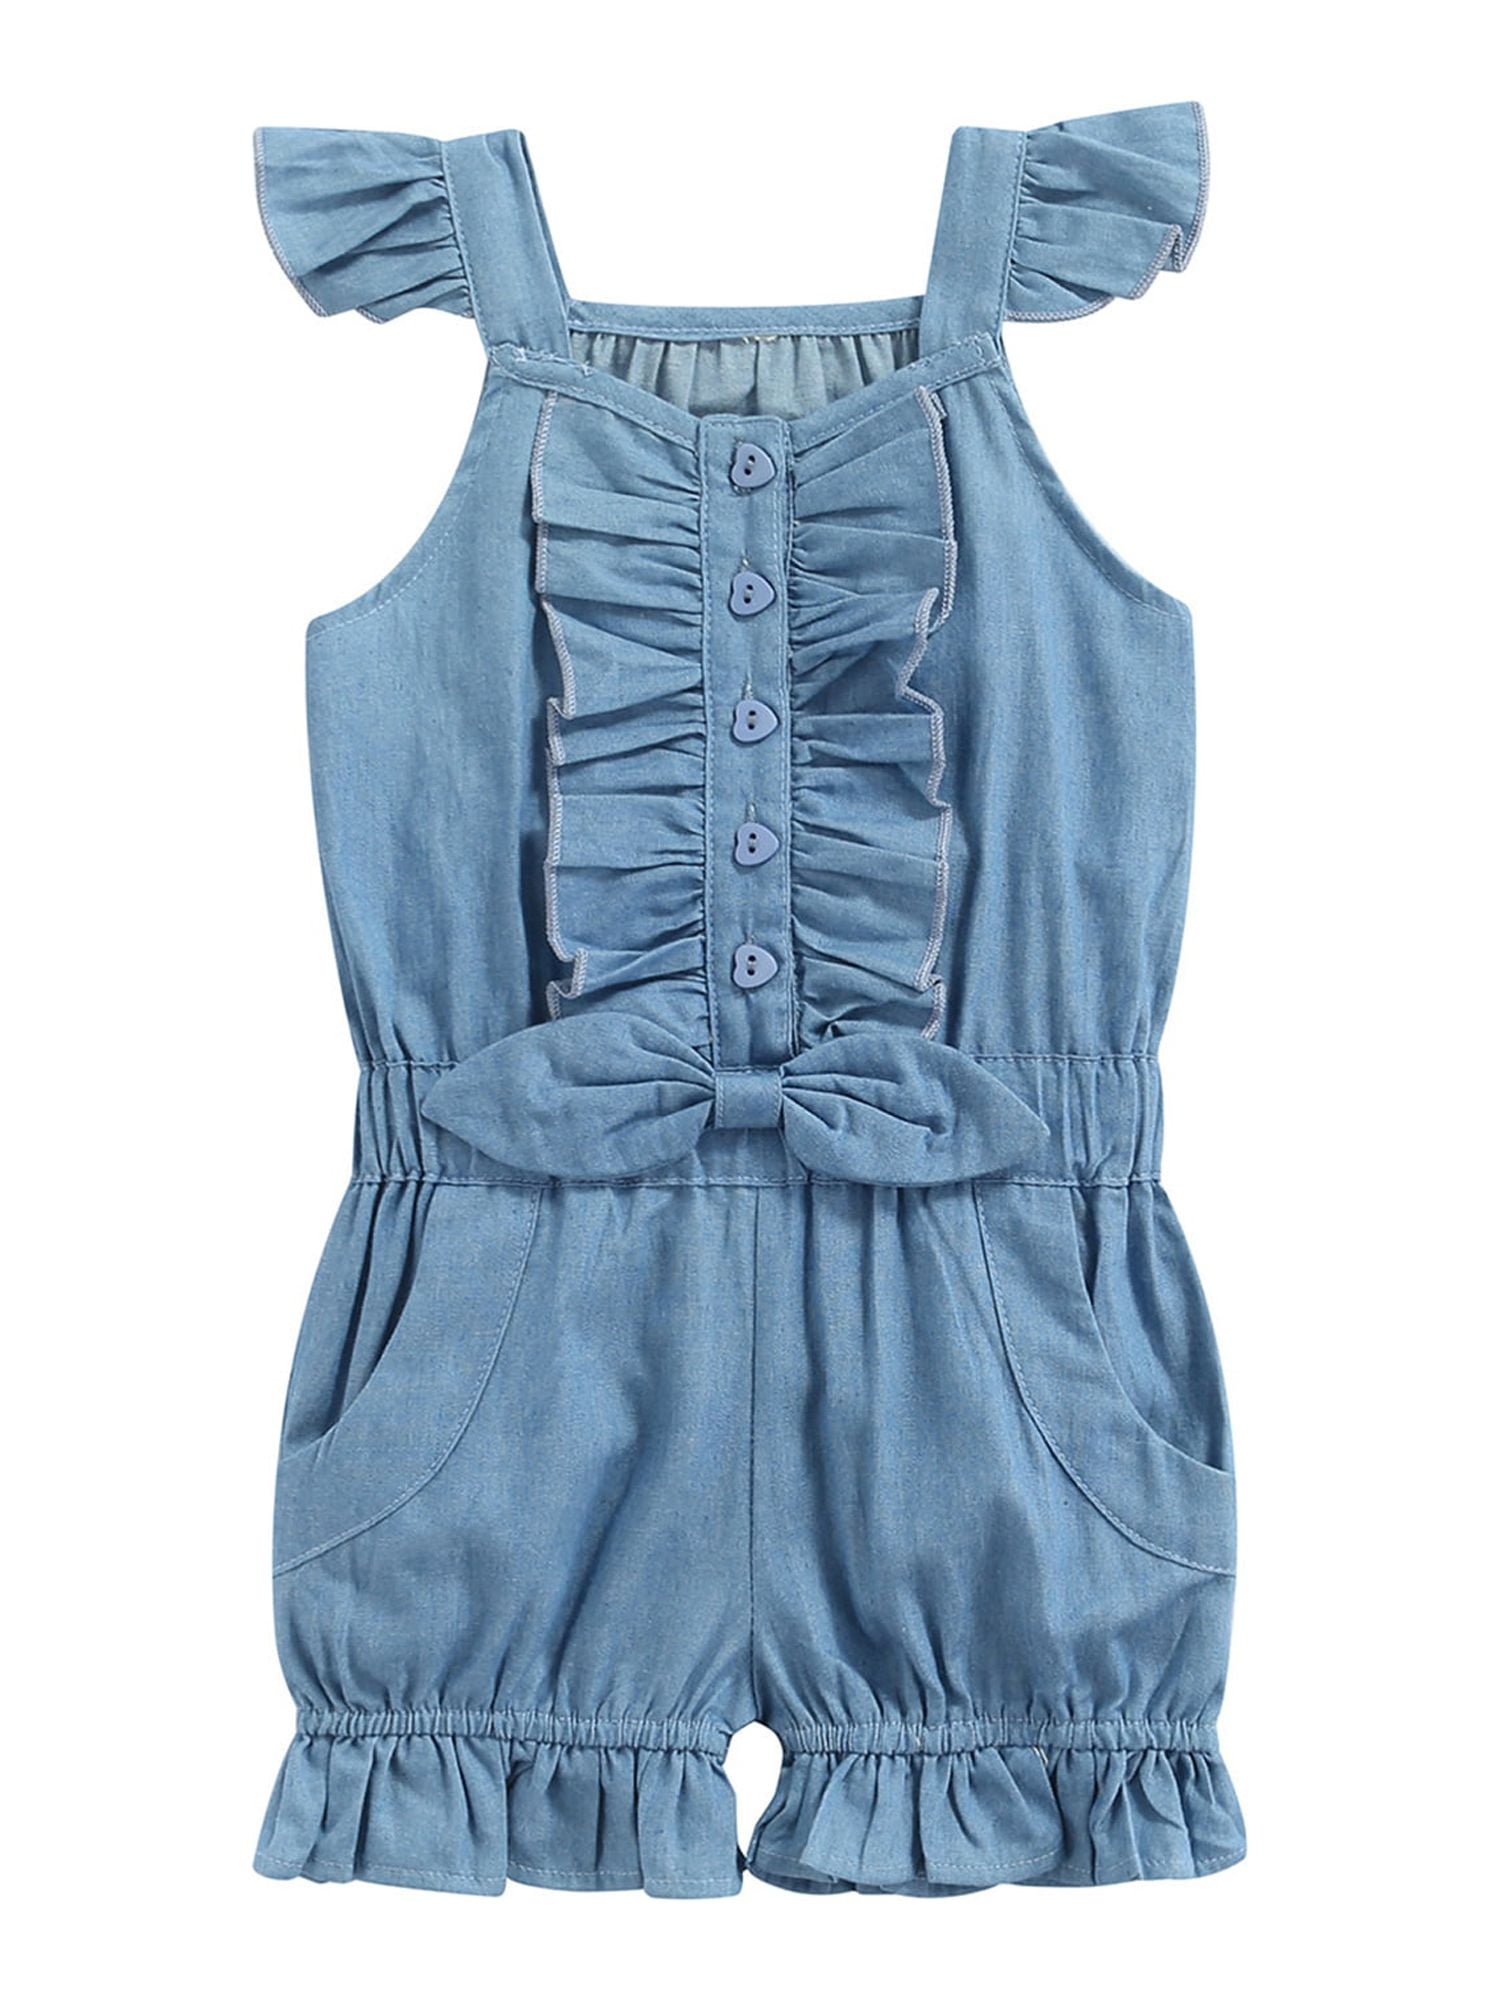 Jumpsuits & Co-ords | Girls Half Jumpsuit | Freeup